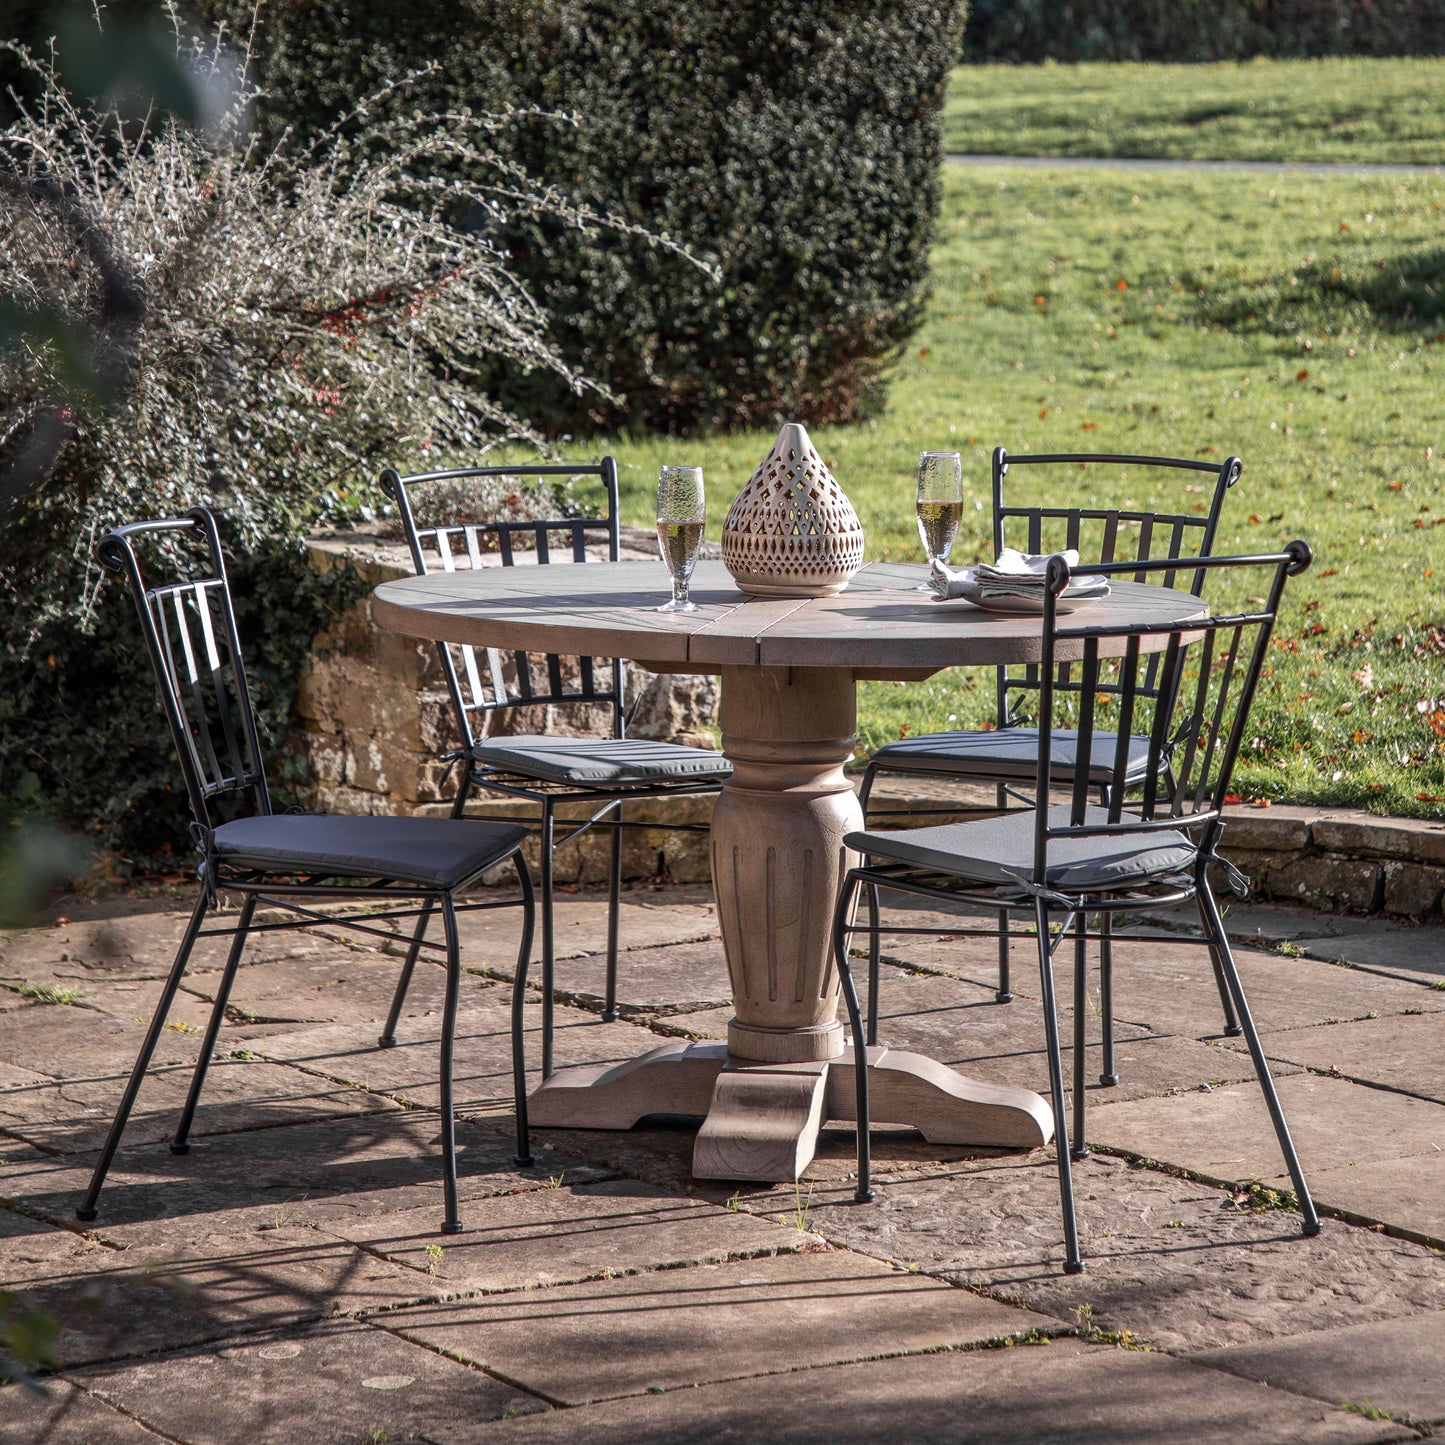 A Harberton Round Dining Table and chairs for interior decor from Kikiathome.co.uk.